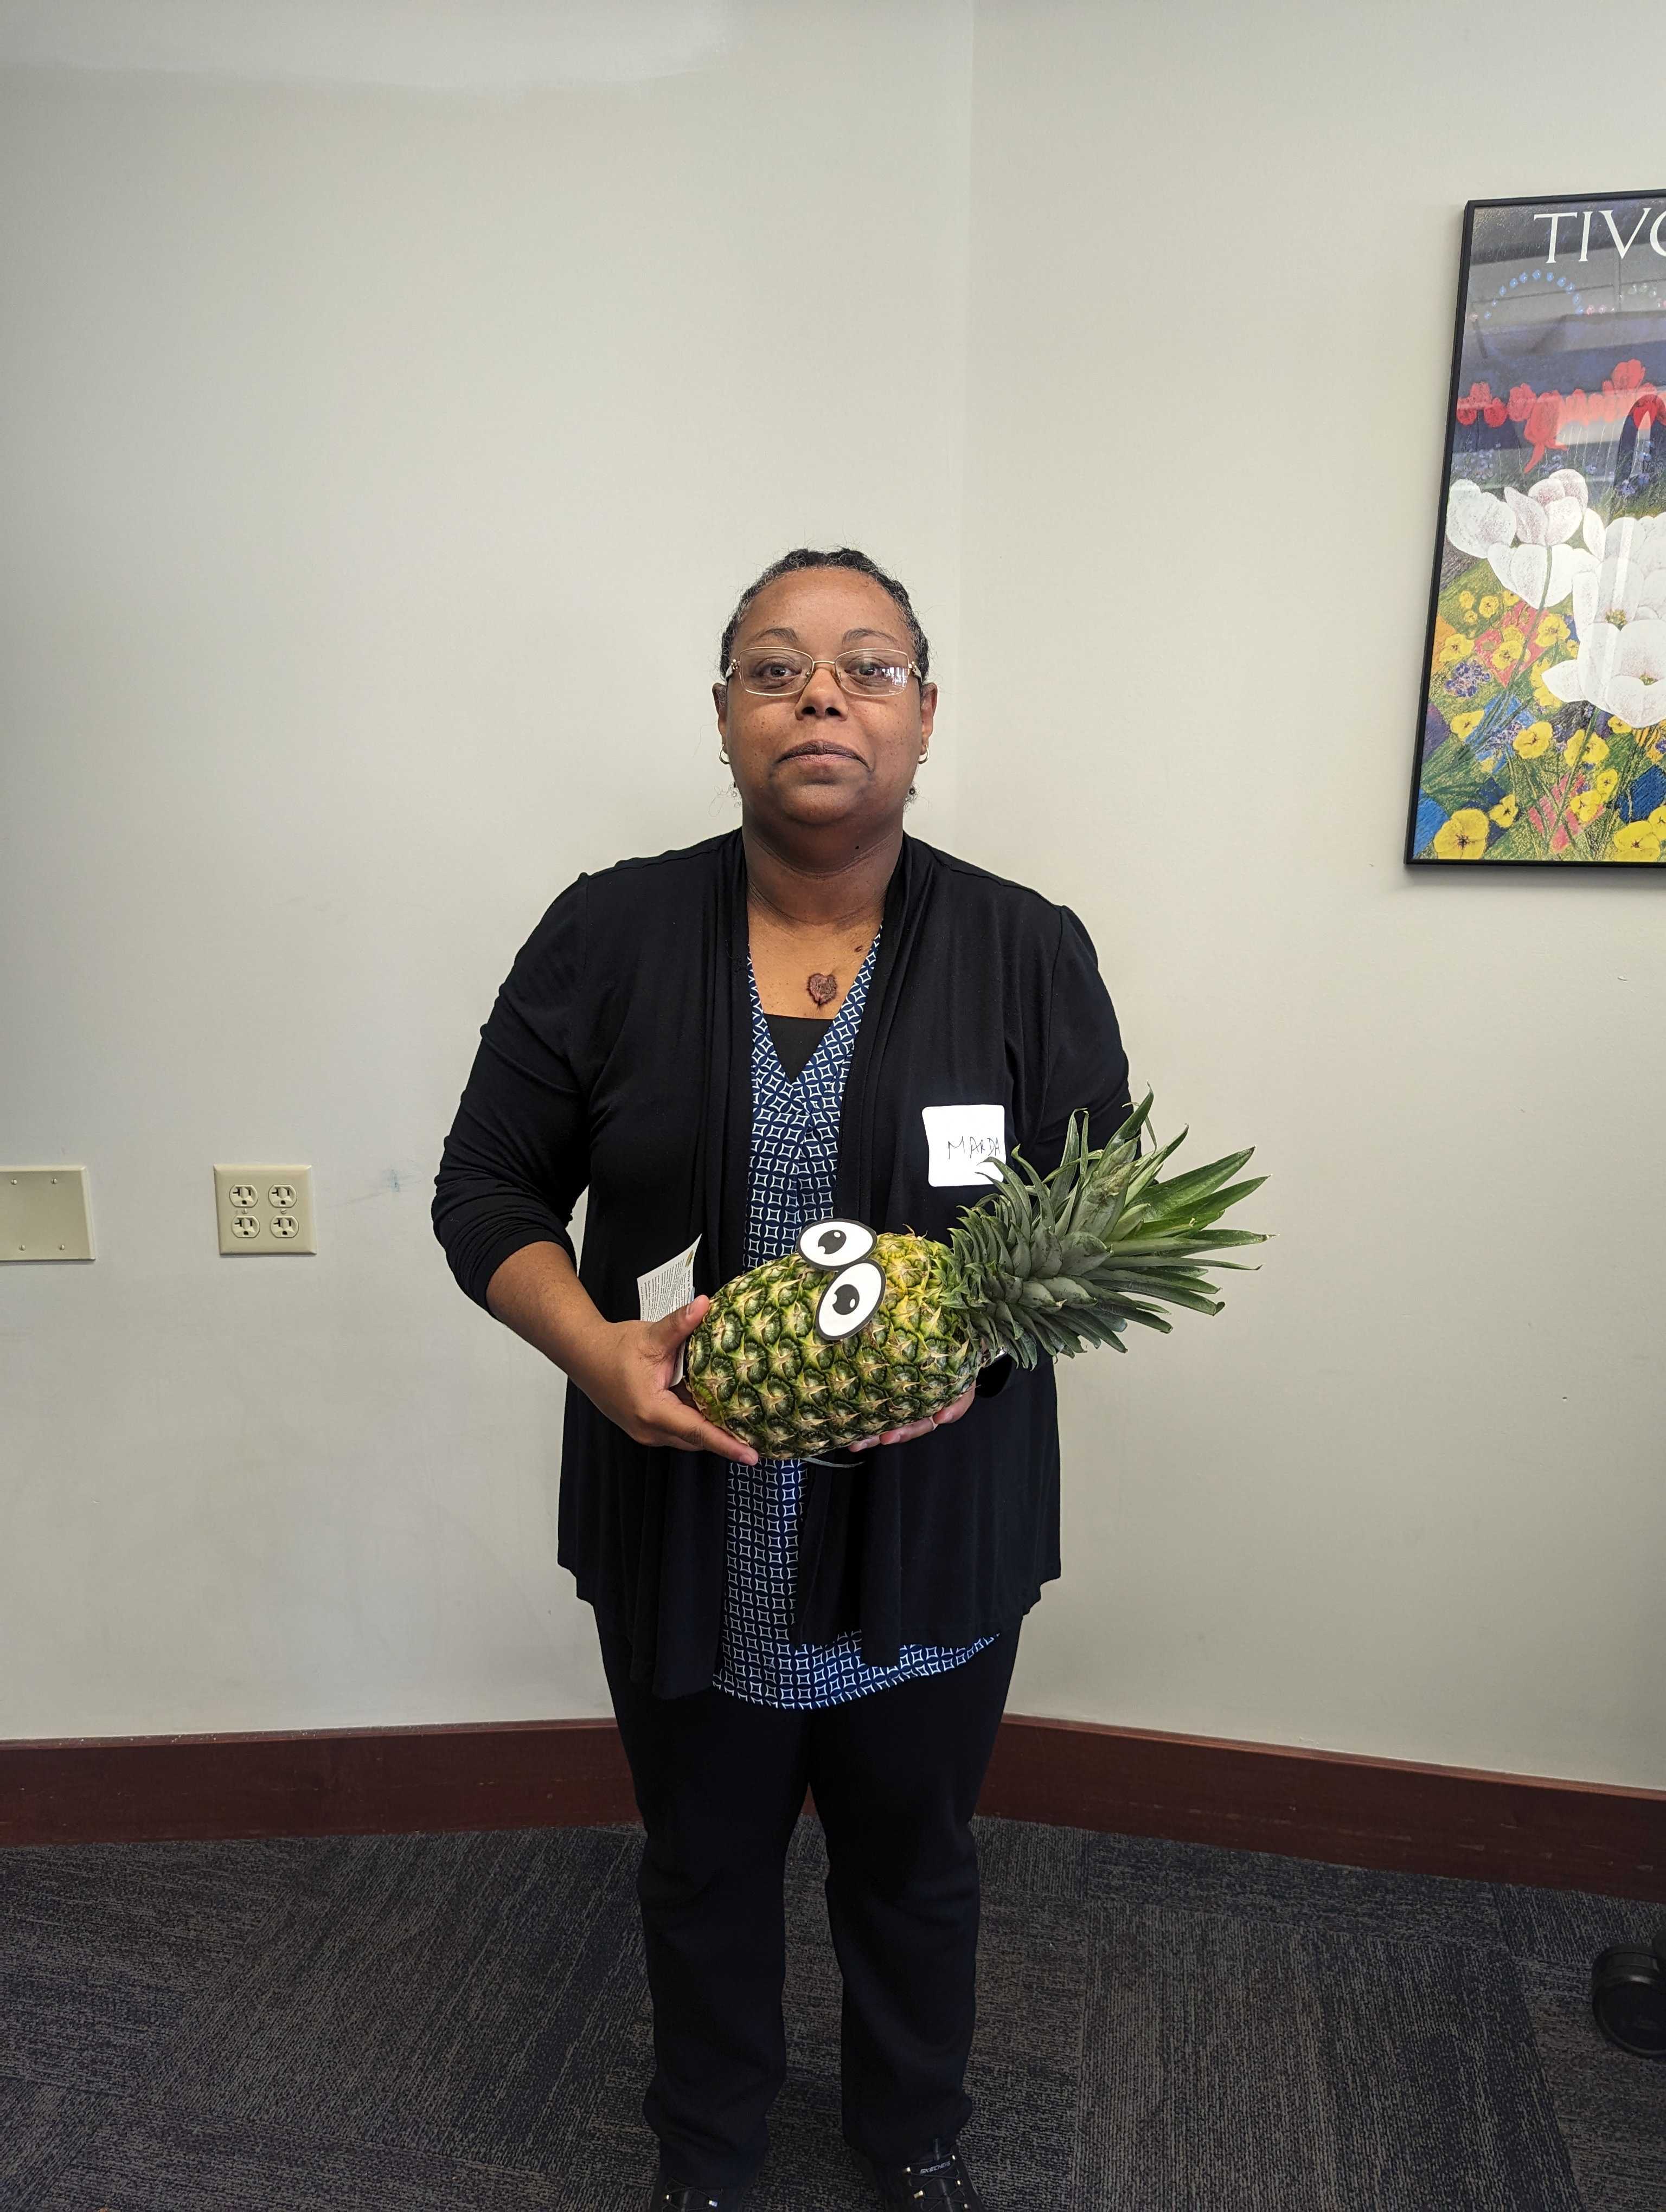 Faculty member Marda Messay poses with a pineapple to signify graduation from ATLS.